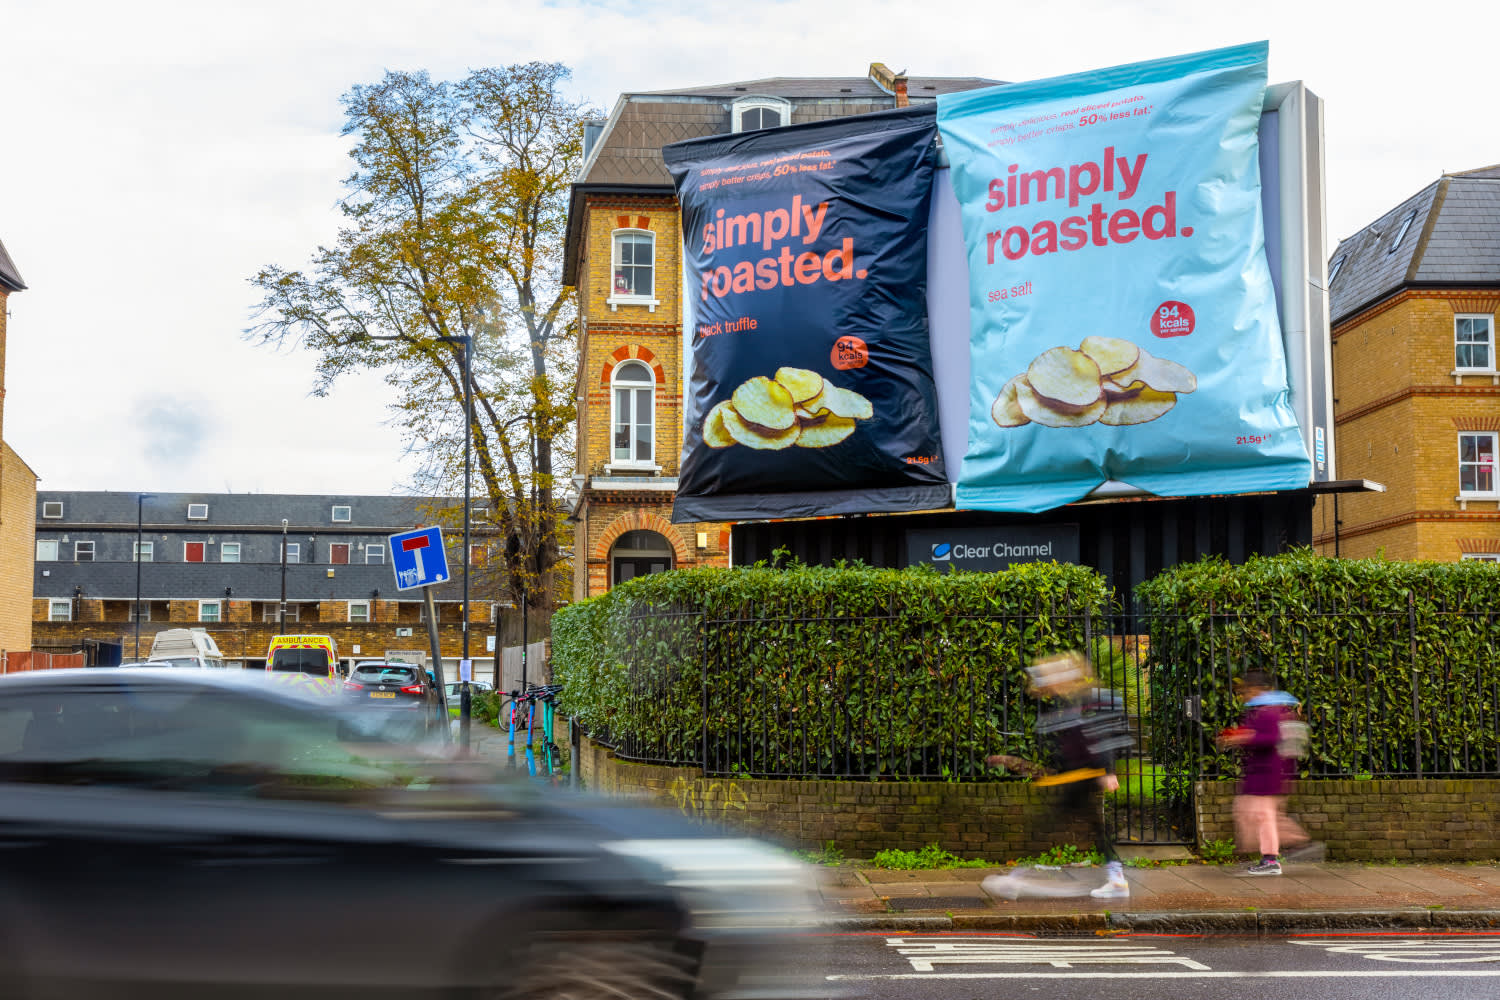 Clear Channel special build billboard showing two large packets of Simply roasted crisps